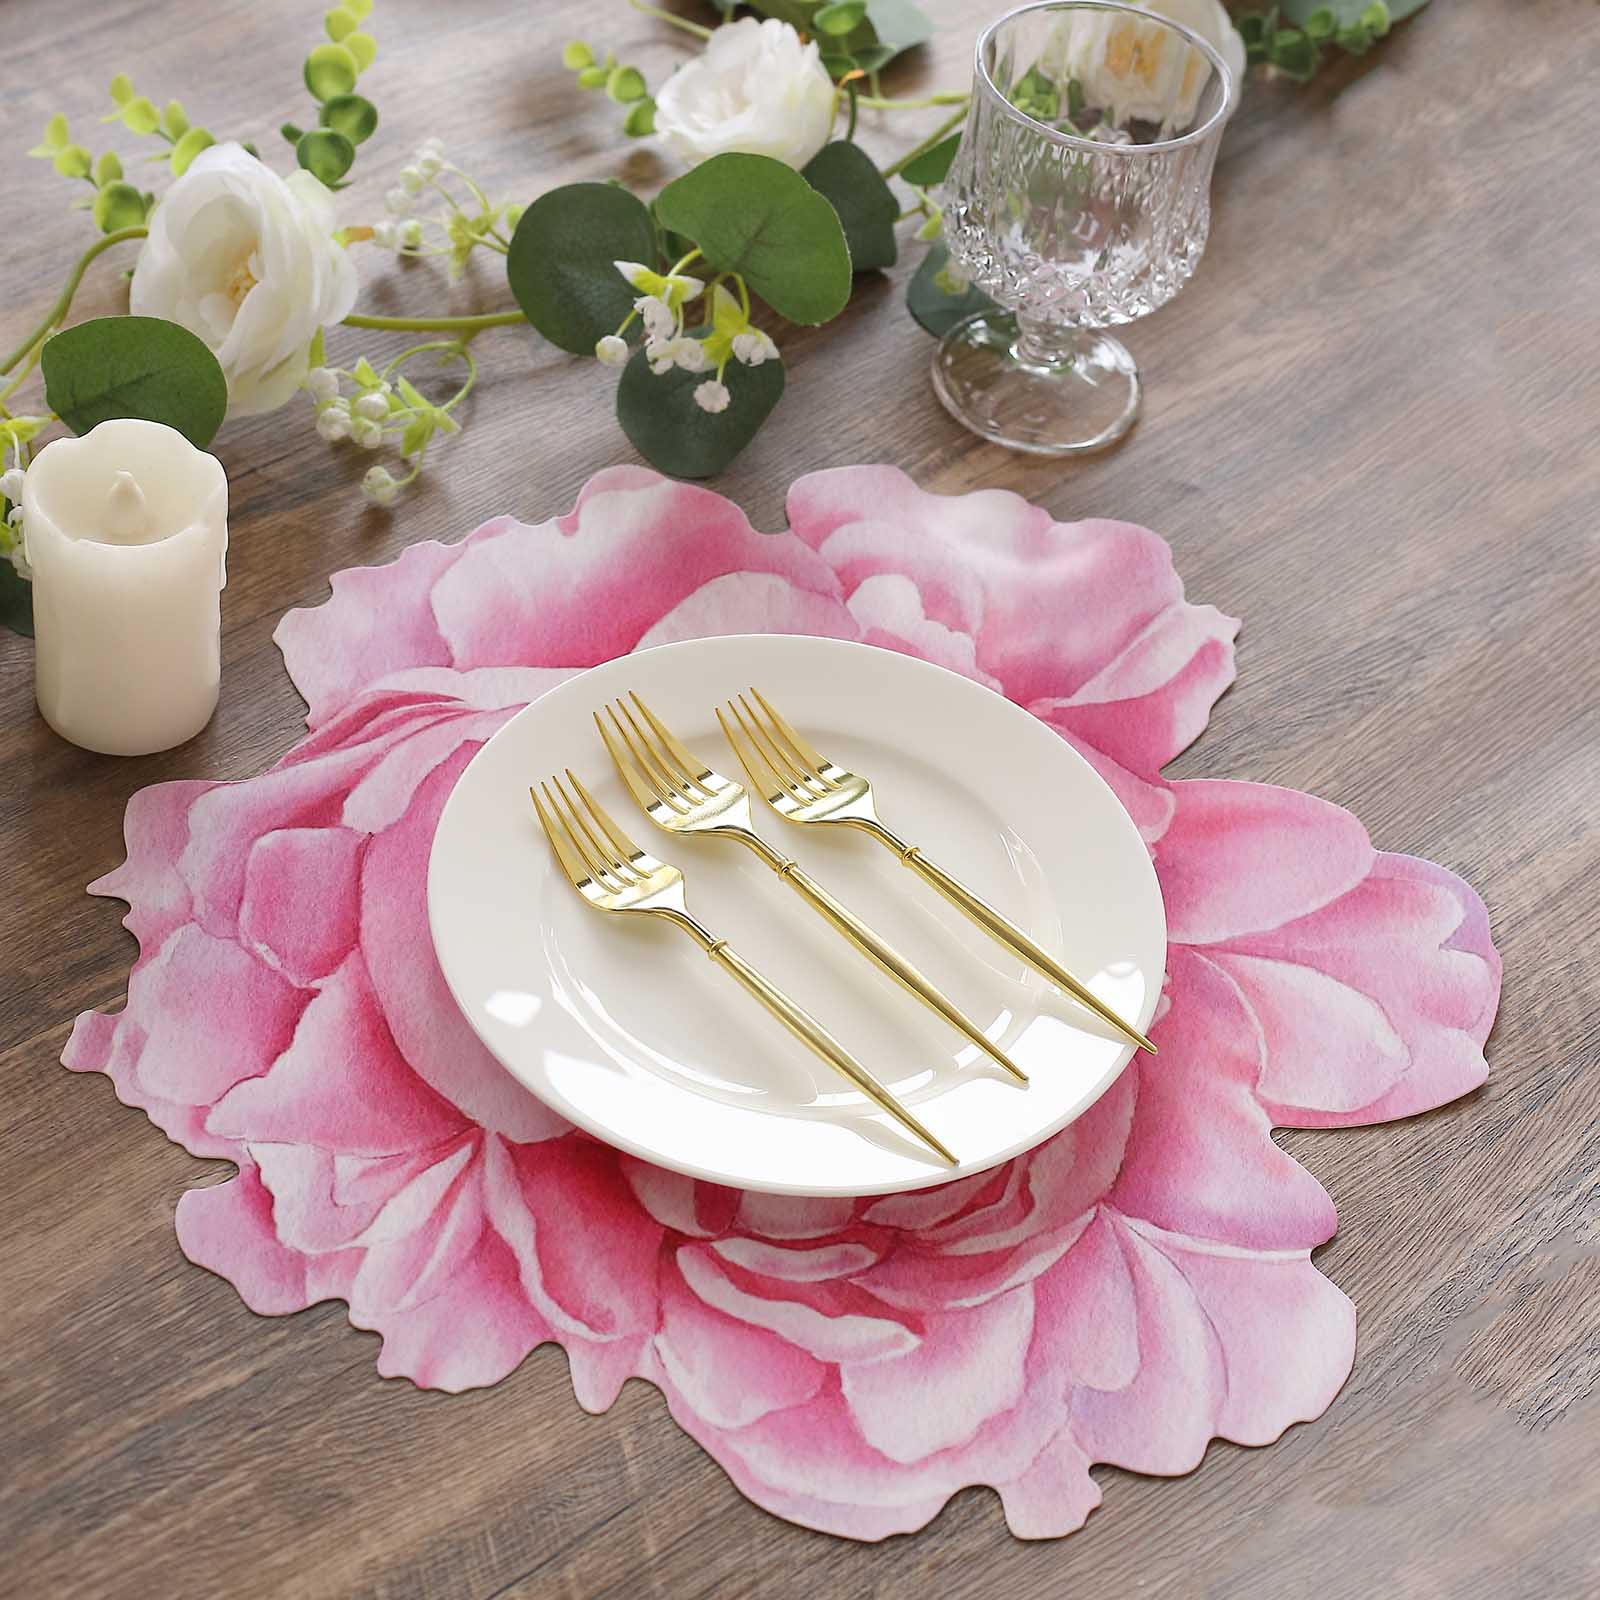 10 Pink Peony Flower Cardboard Paper Placemats